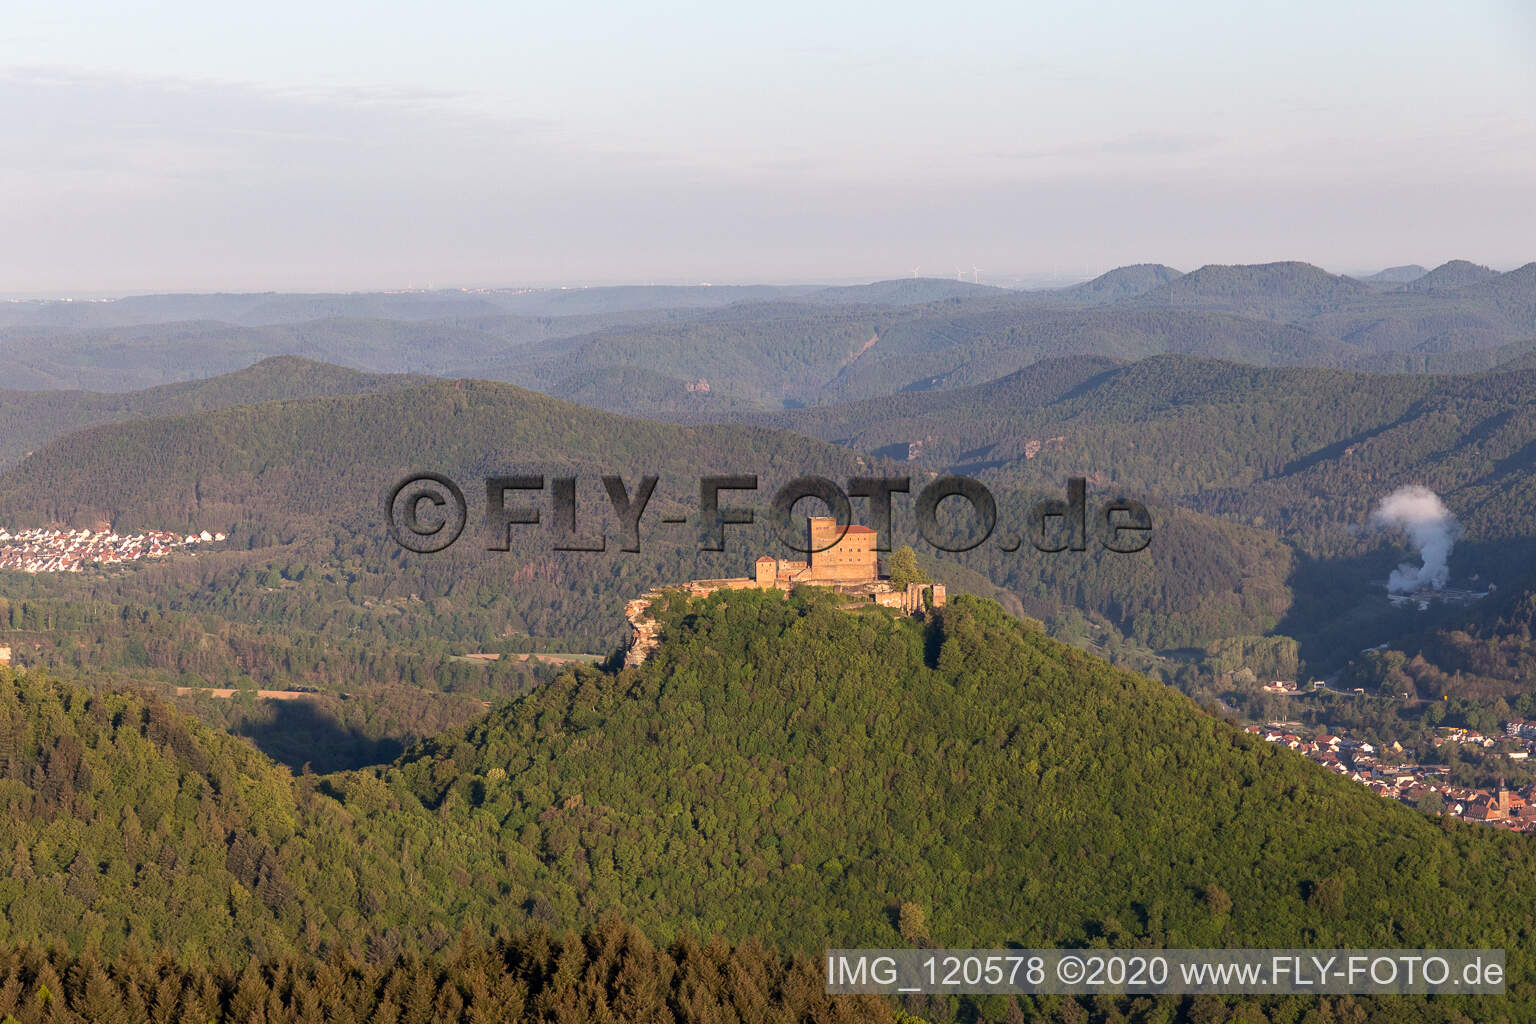 Aerial view of Trifels, Anebos and Scharfenberg castles in the district Bindersbach in Annweiler am Trifels in the state Rhineland-Palatinate, Germany